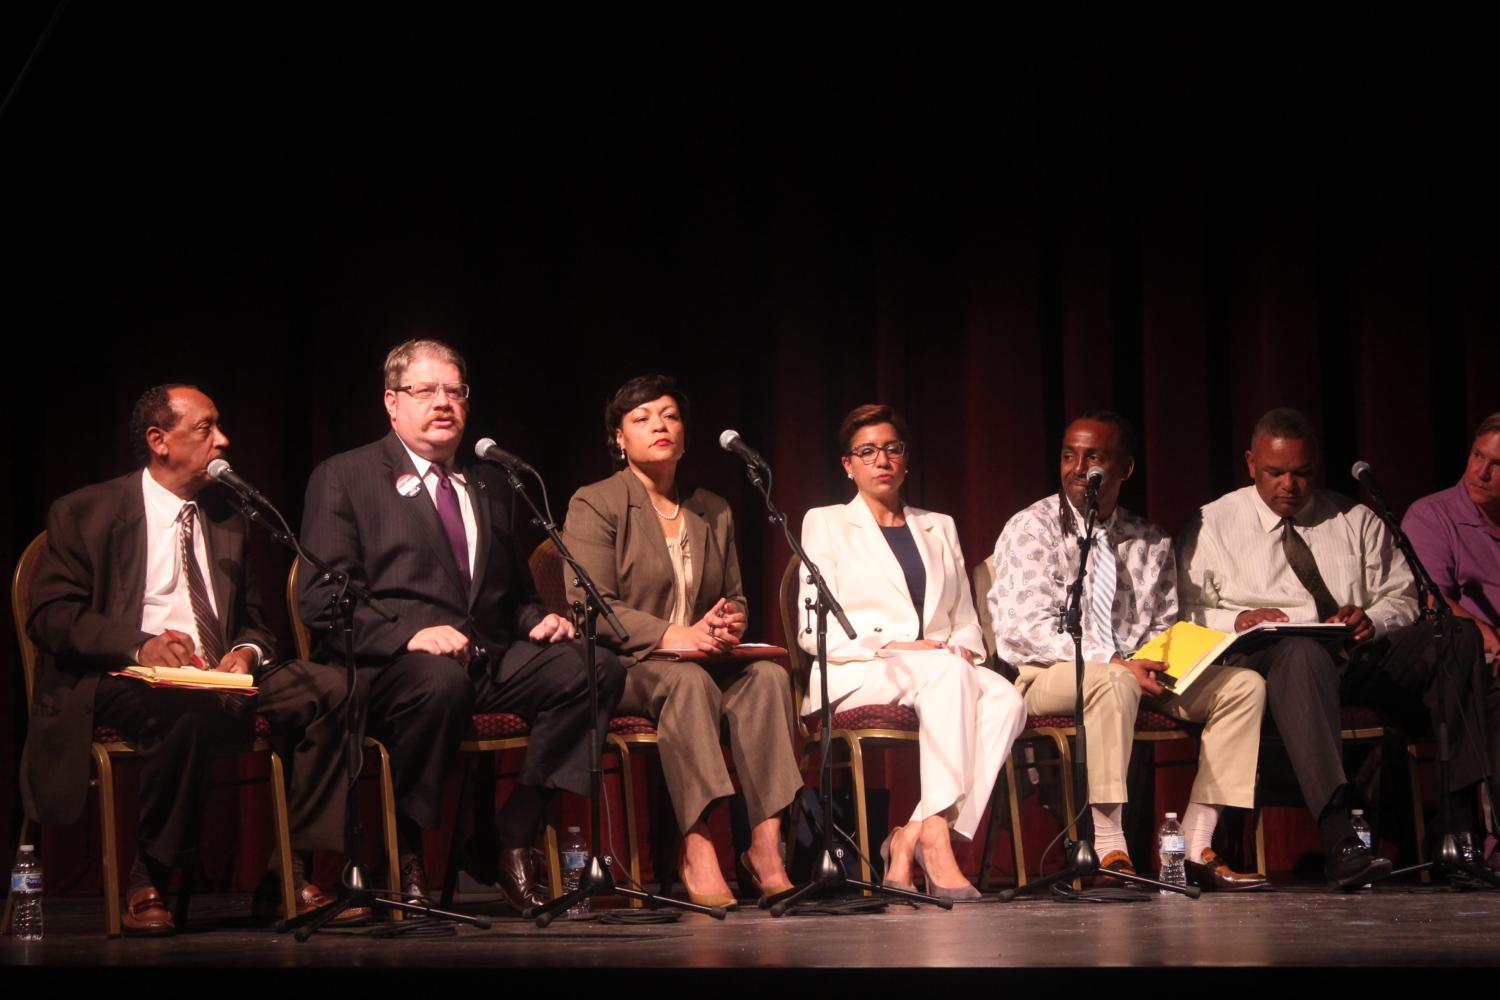 Mayoral candidates discuss current issues with policies facing musicians in New Orleans Photo credit: Caleb Beck